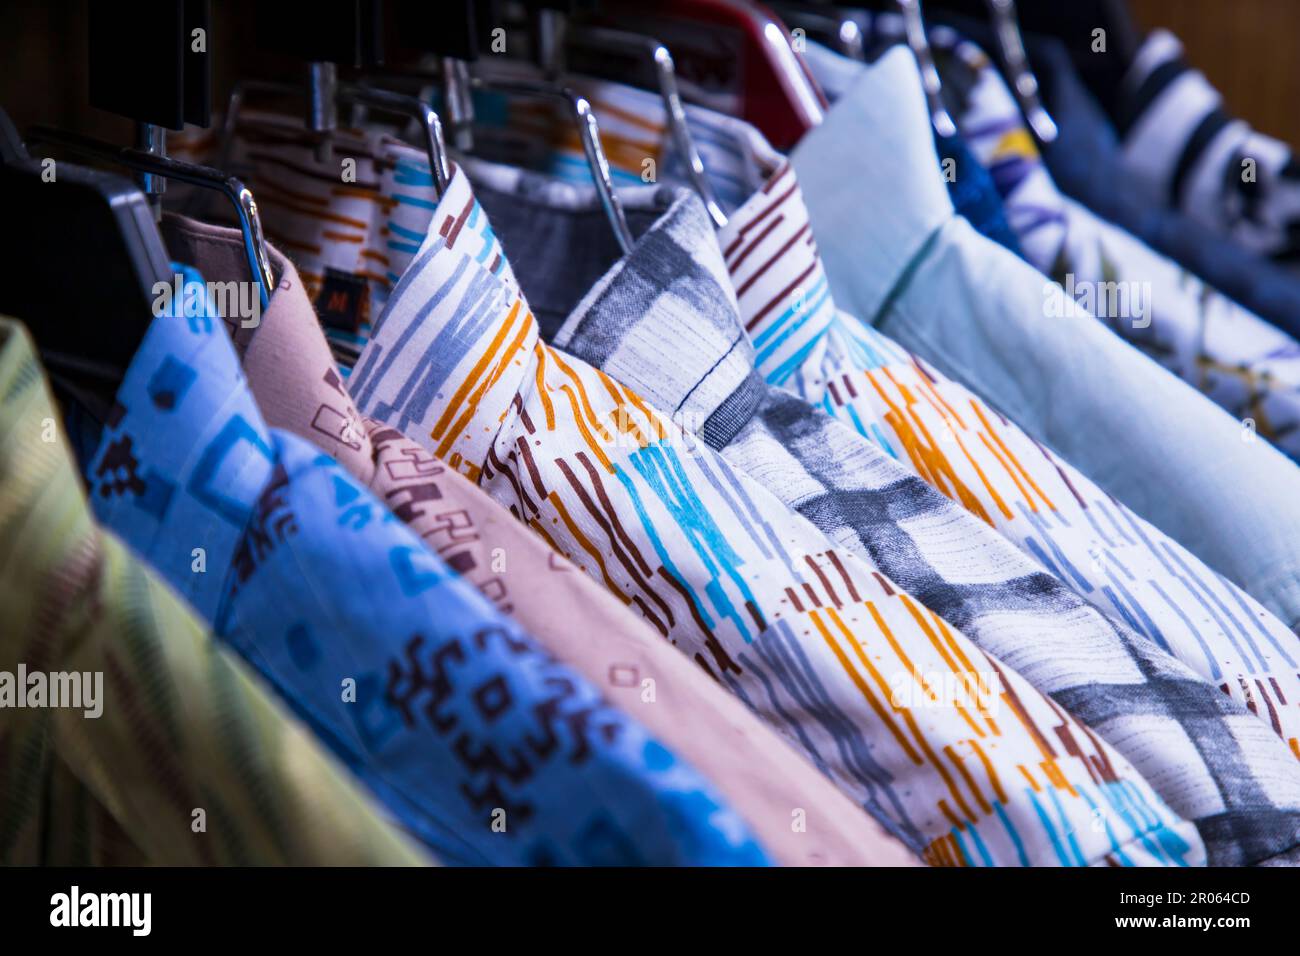 Colorful variety of Shirt  hangings in a clothing Showroom. Close-up Focus Stock Photo